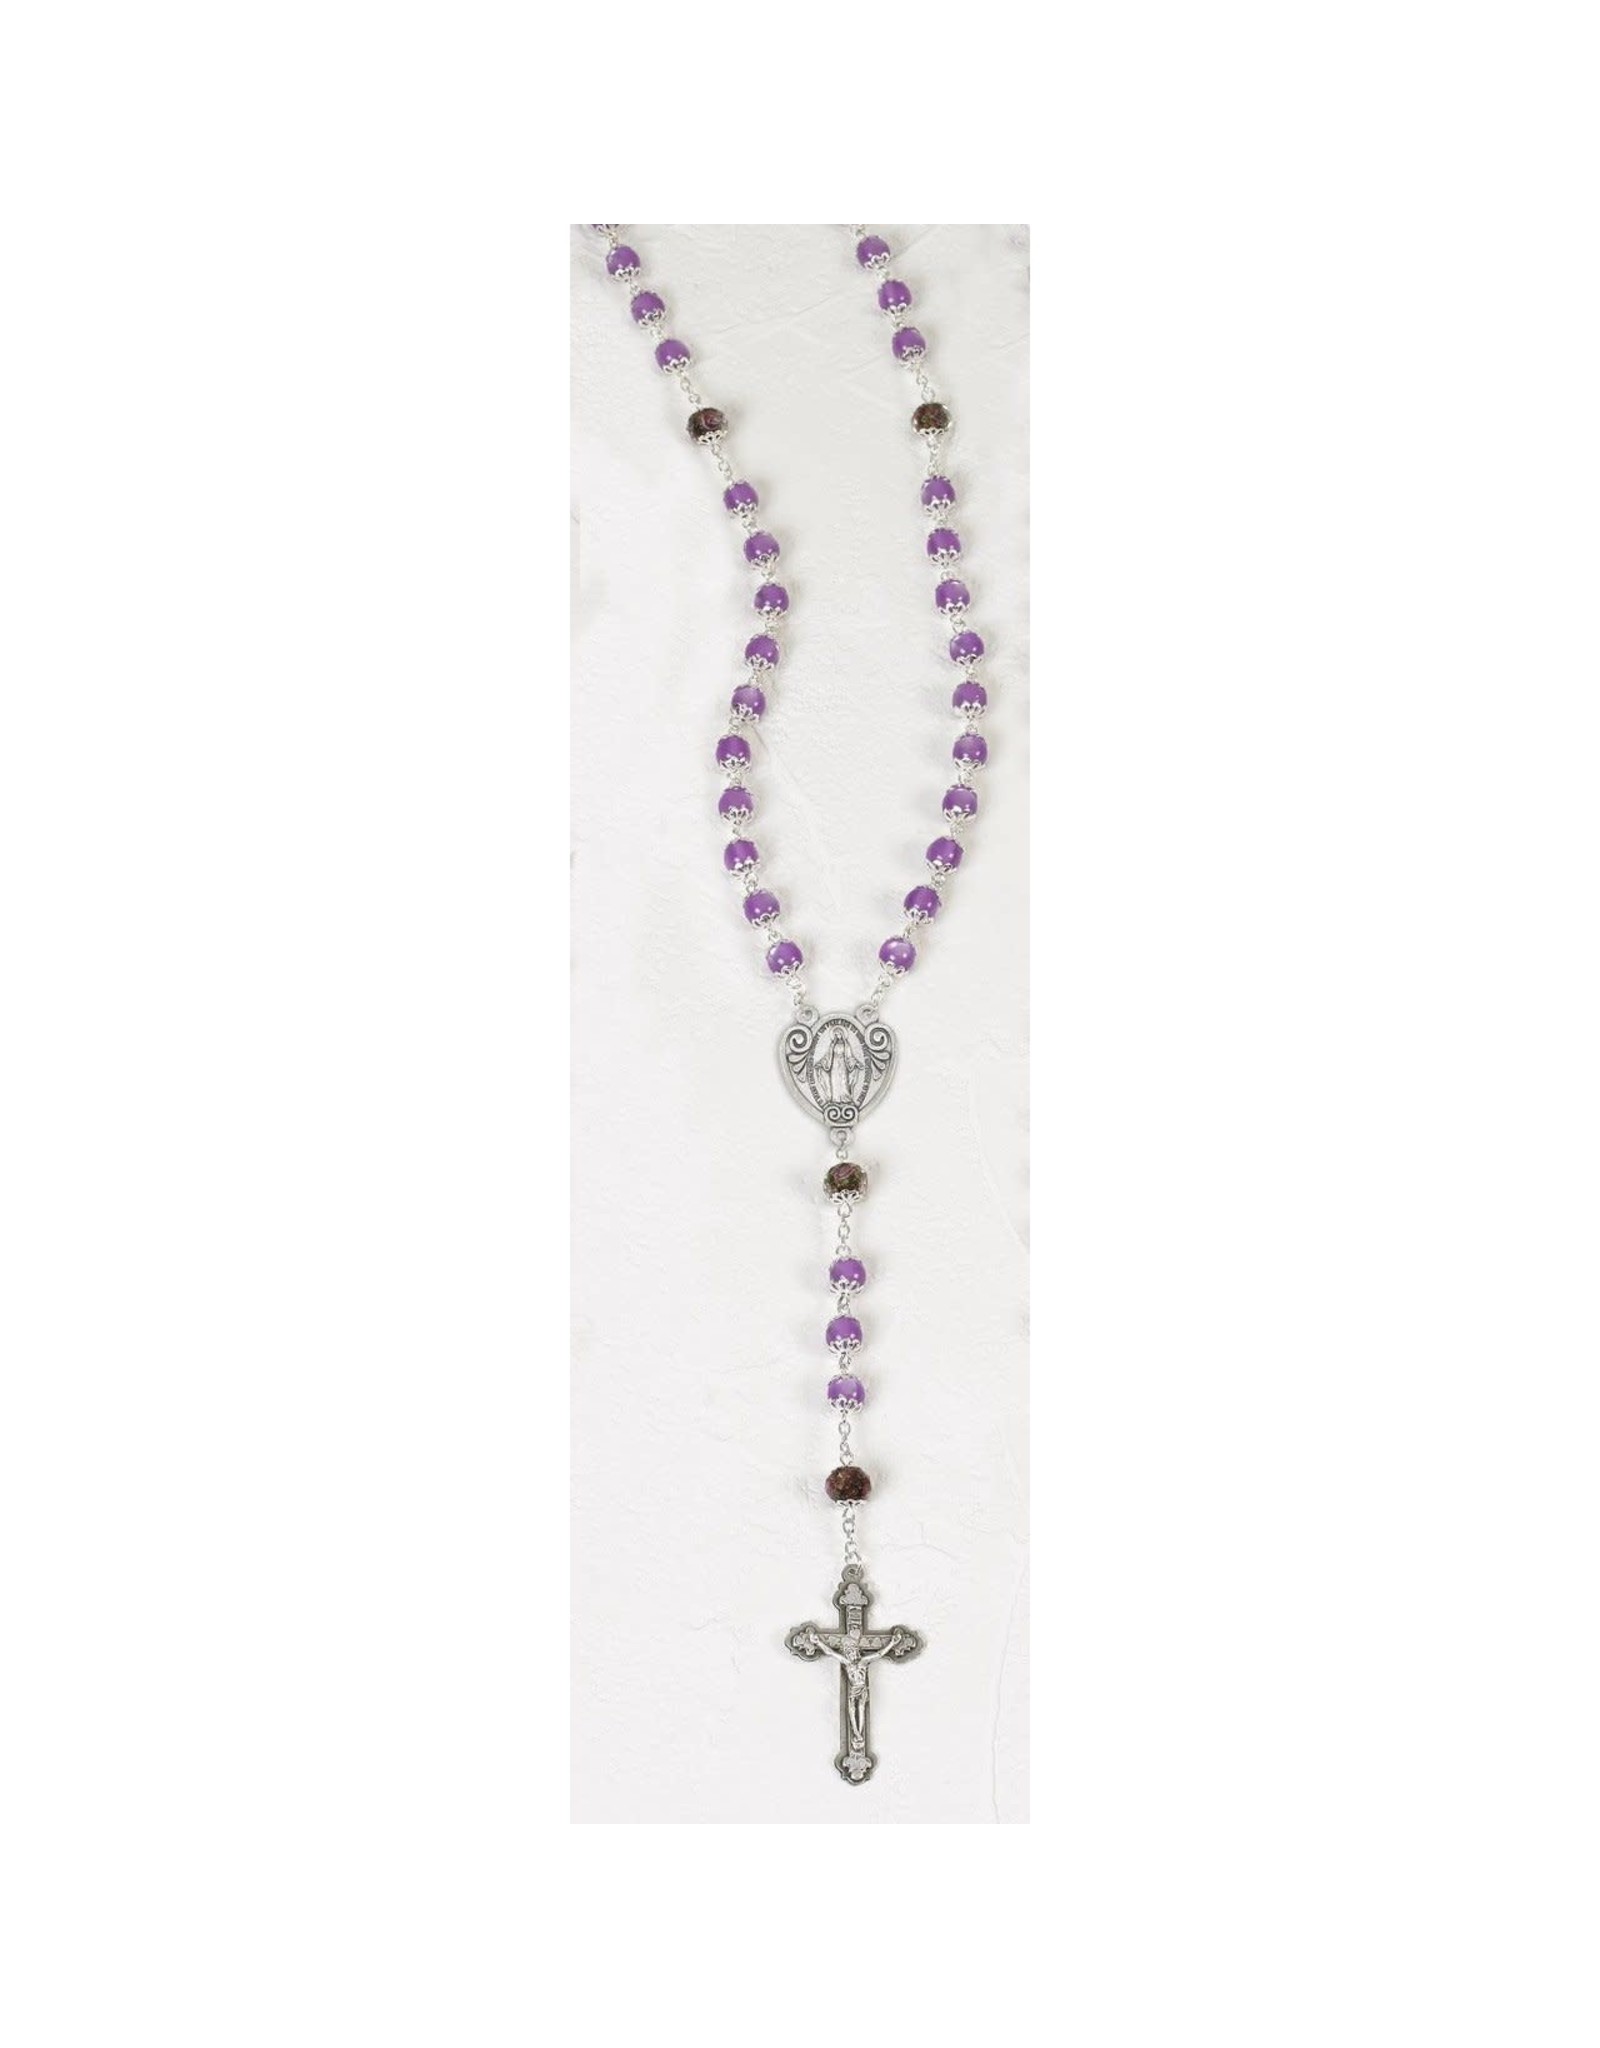 Lumen Mundi Violet Rosary with Genuine Crystal Our Father Beads